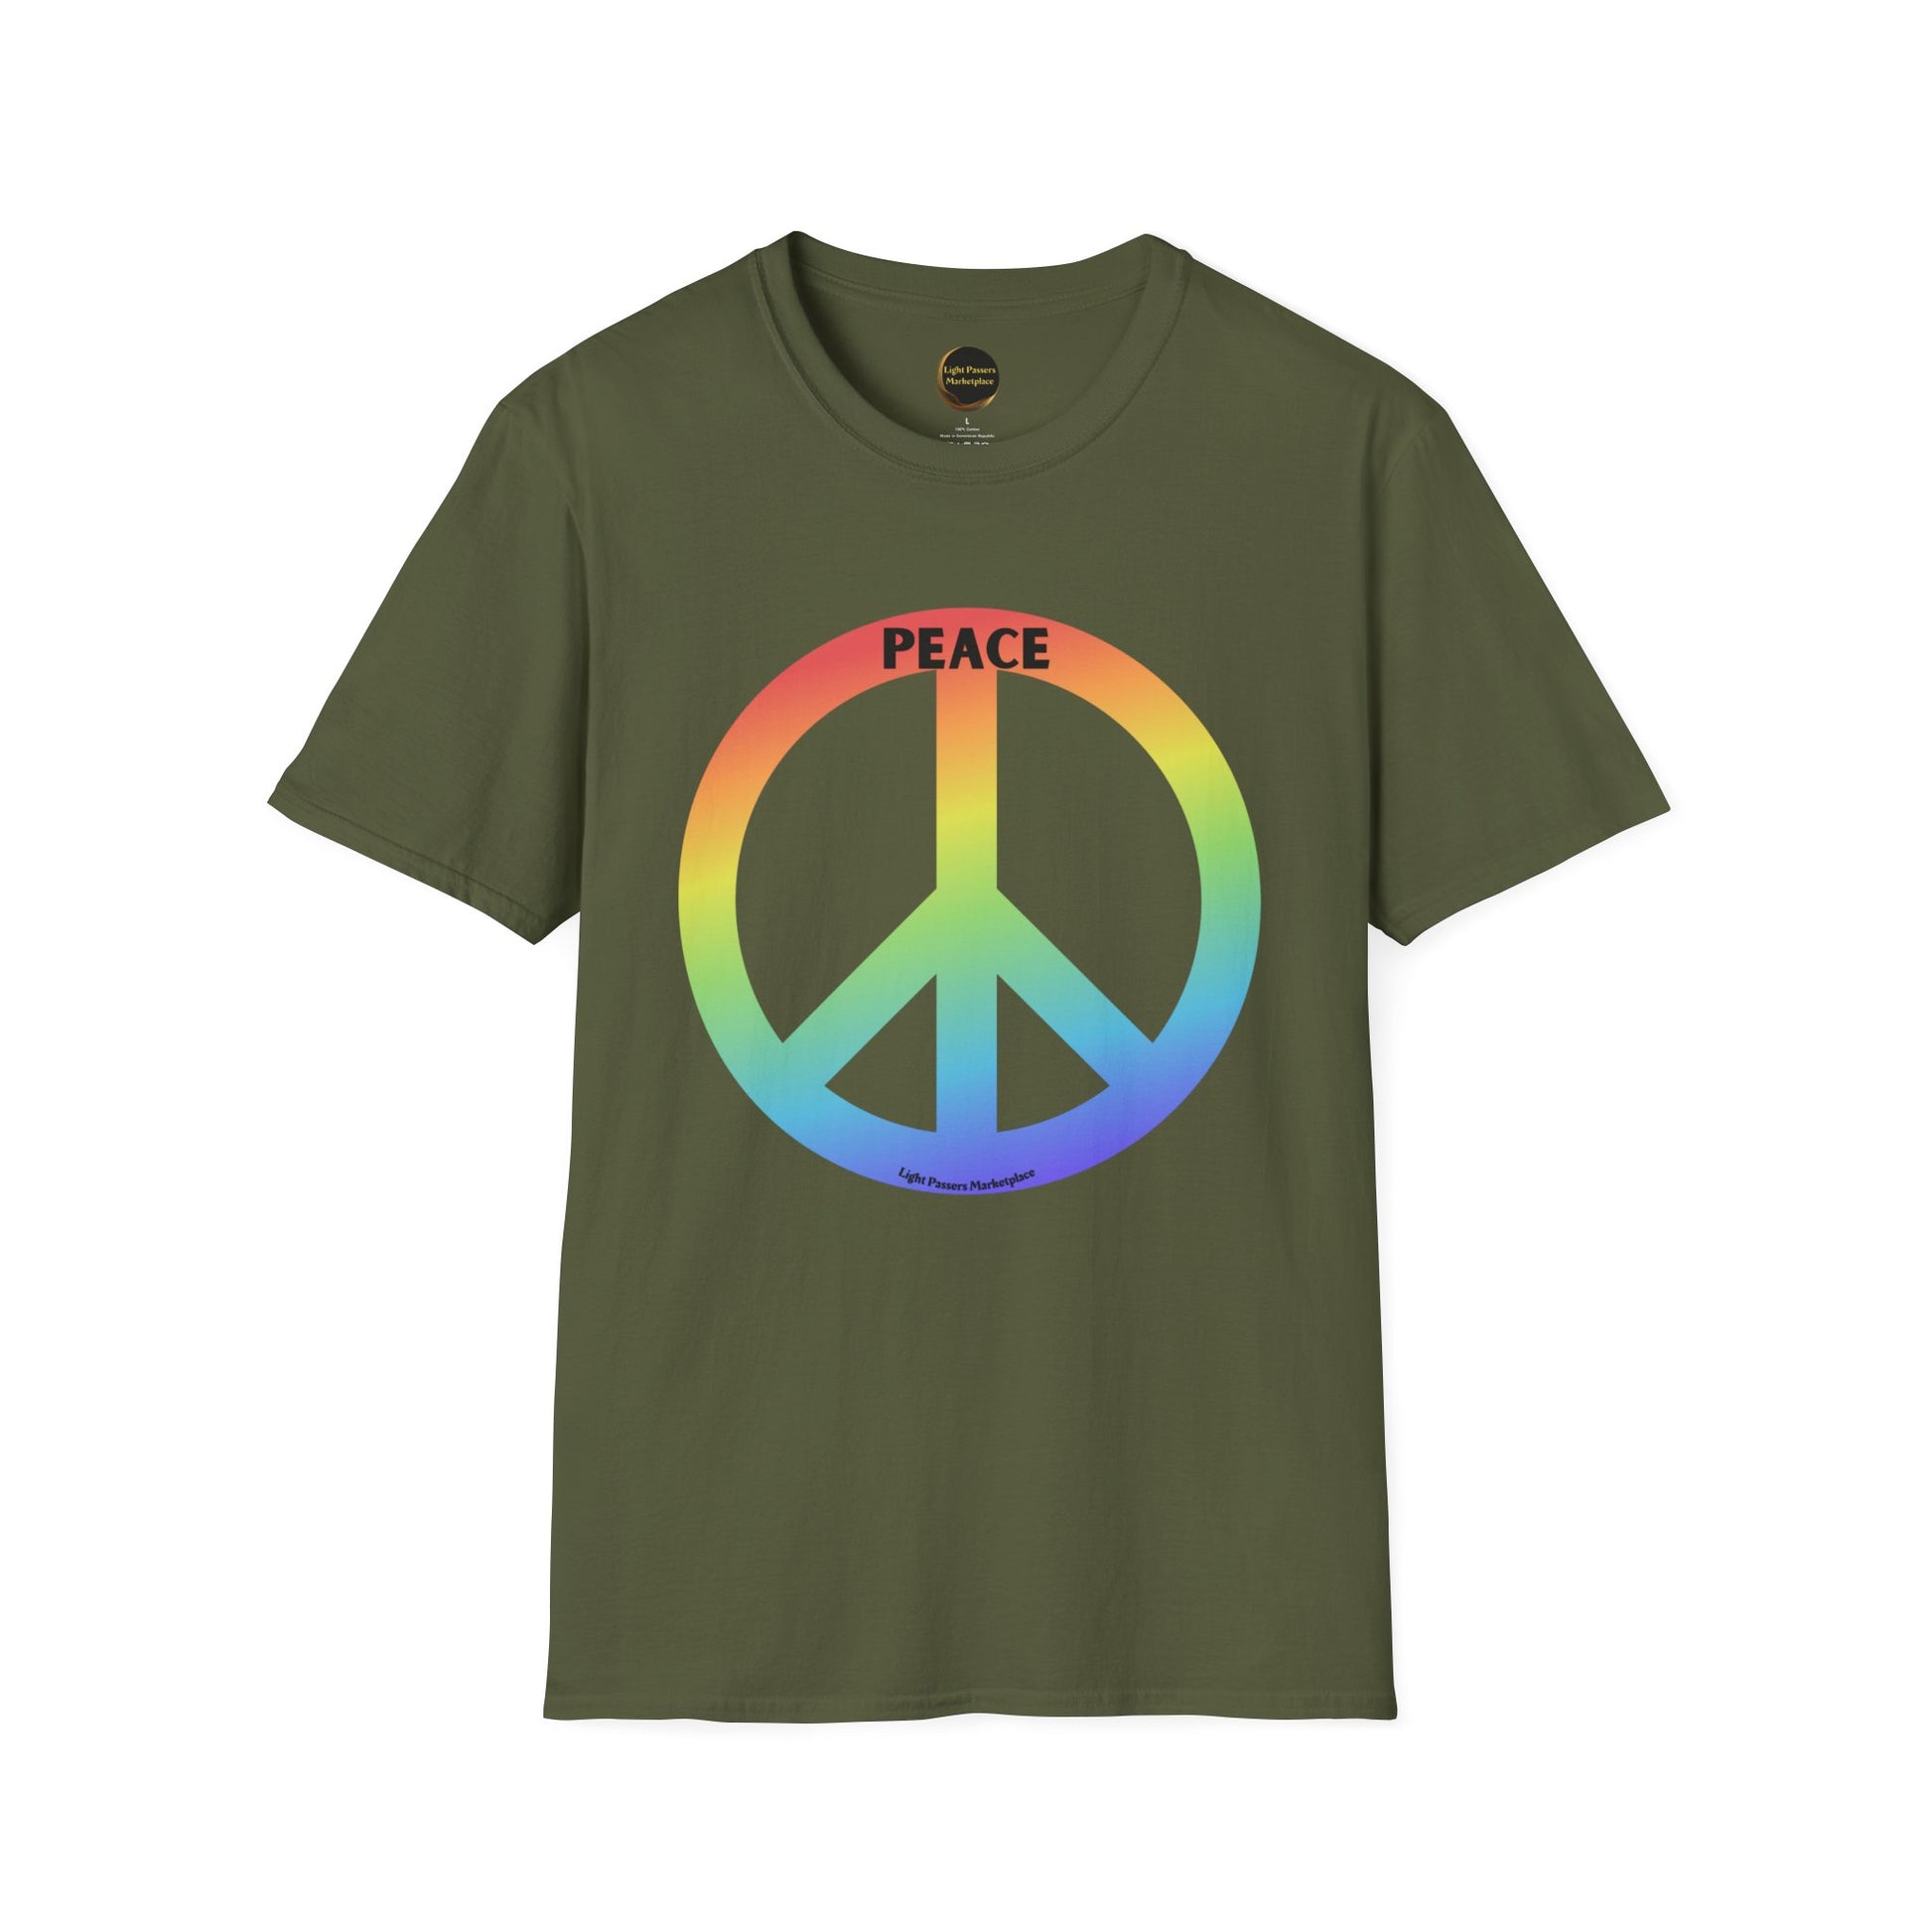 A green unisex T-shirt featuring a peace sign logo, made of soft 100% ring-spun cotton. Classic fit with a crew neckline, ethically sourced and tear-away label for comfort.